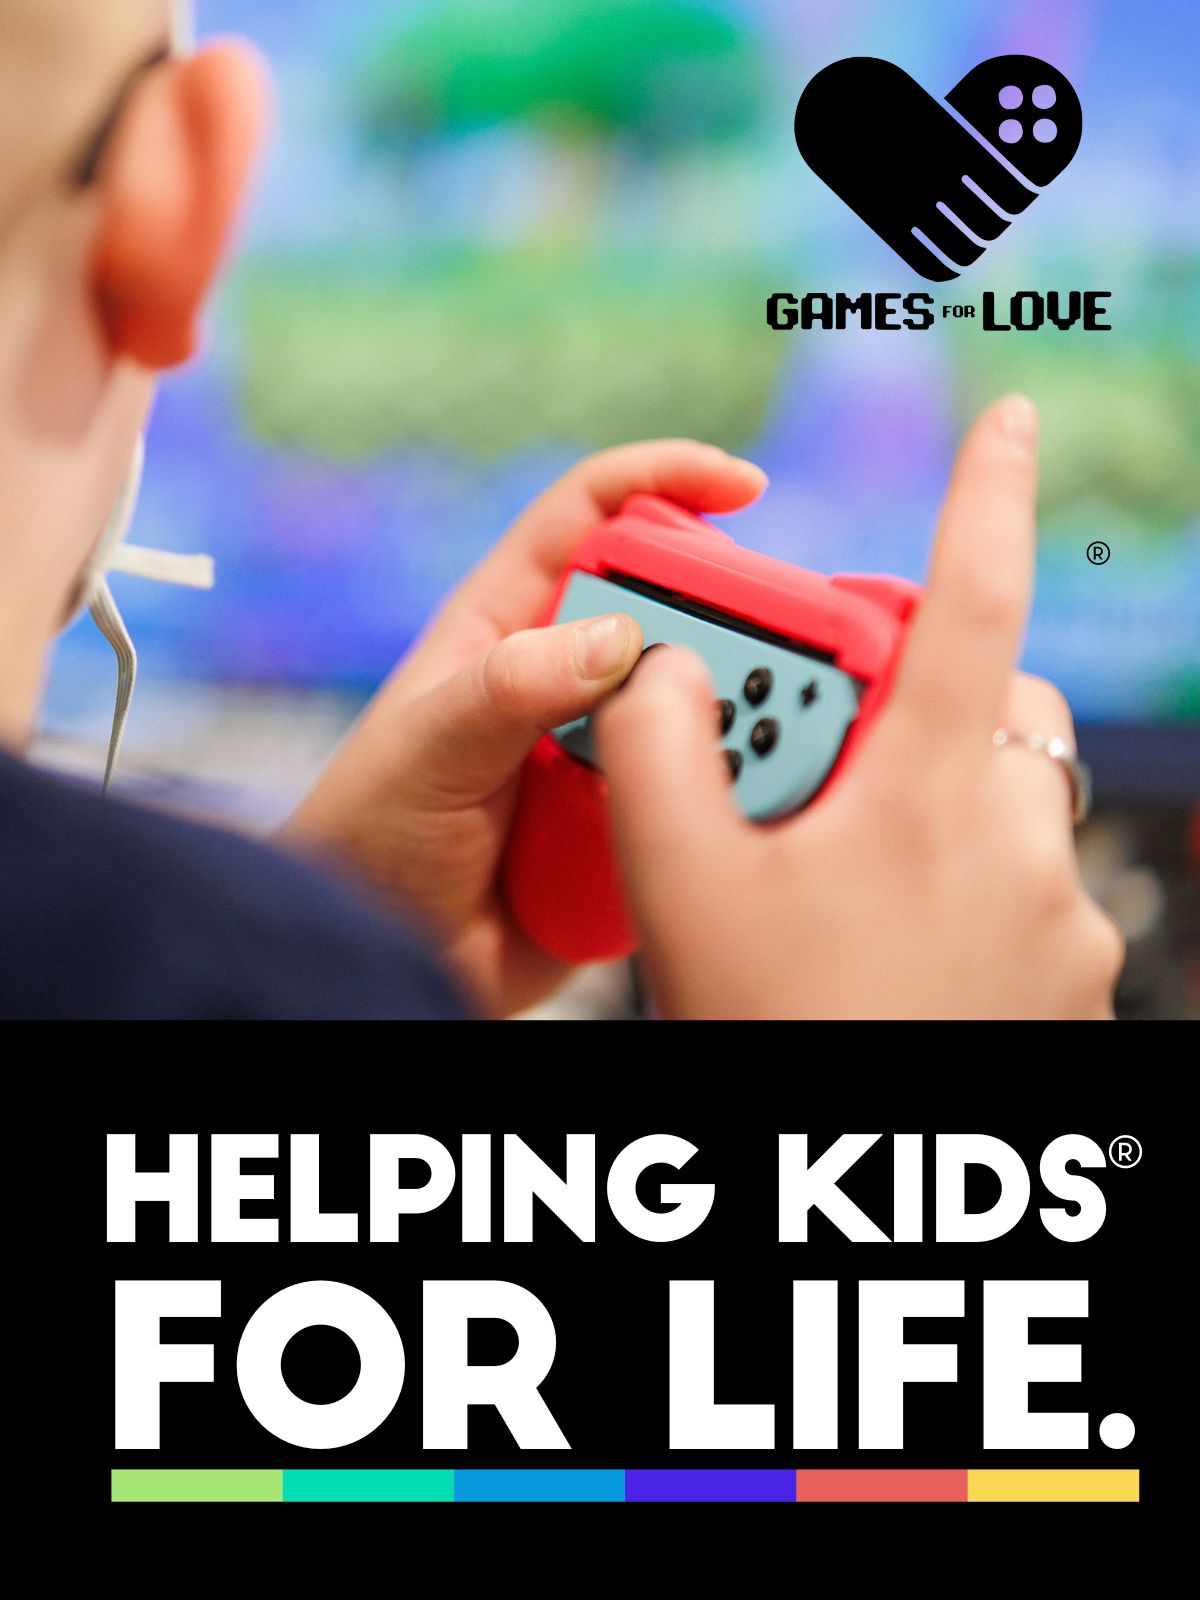 Jack Black Helps Kids With Games For Love